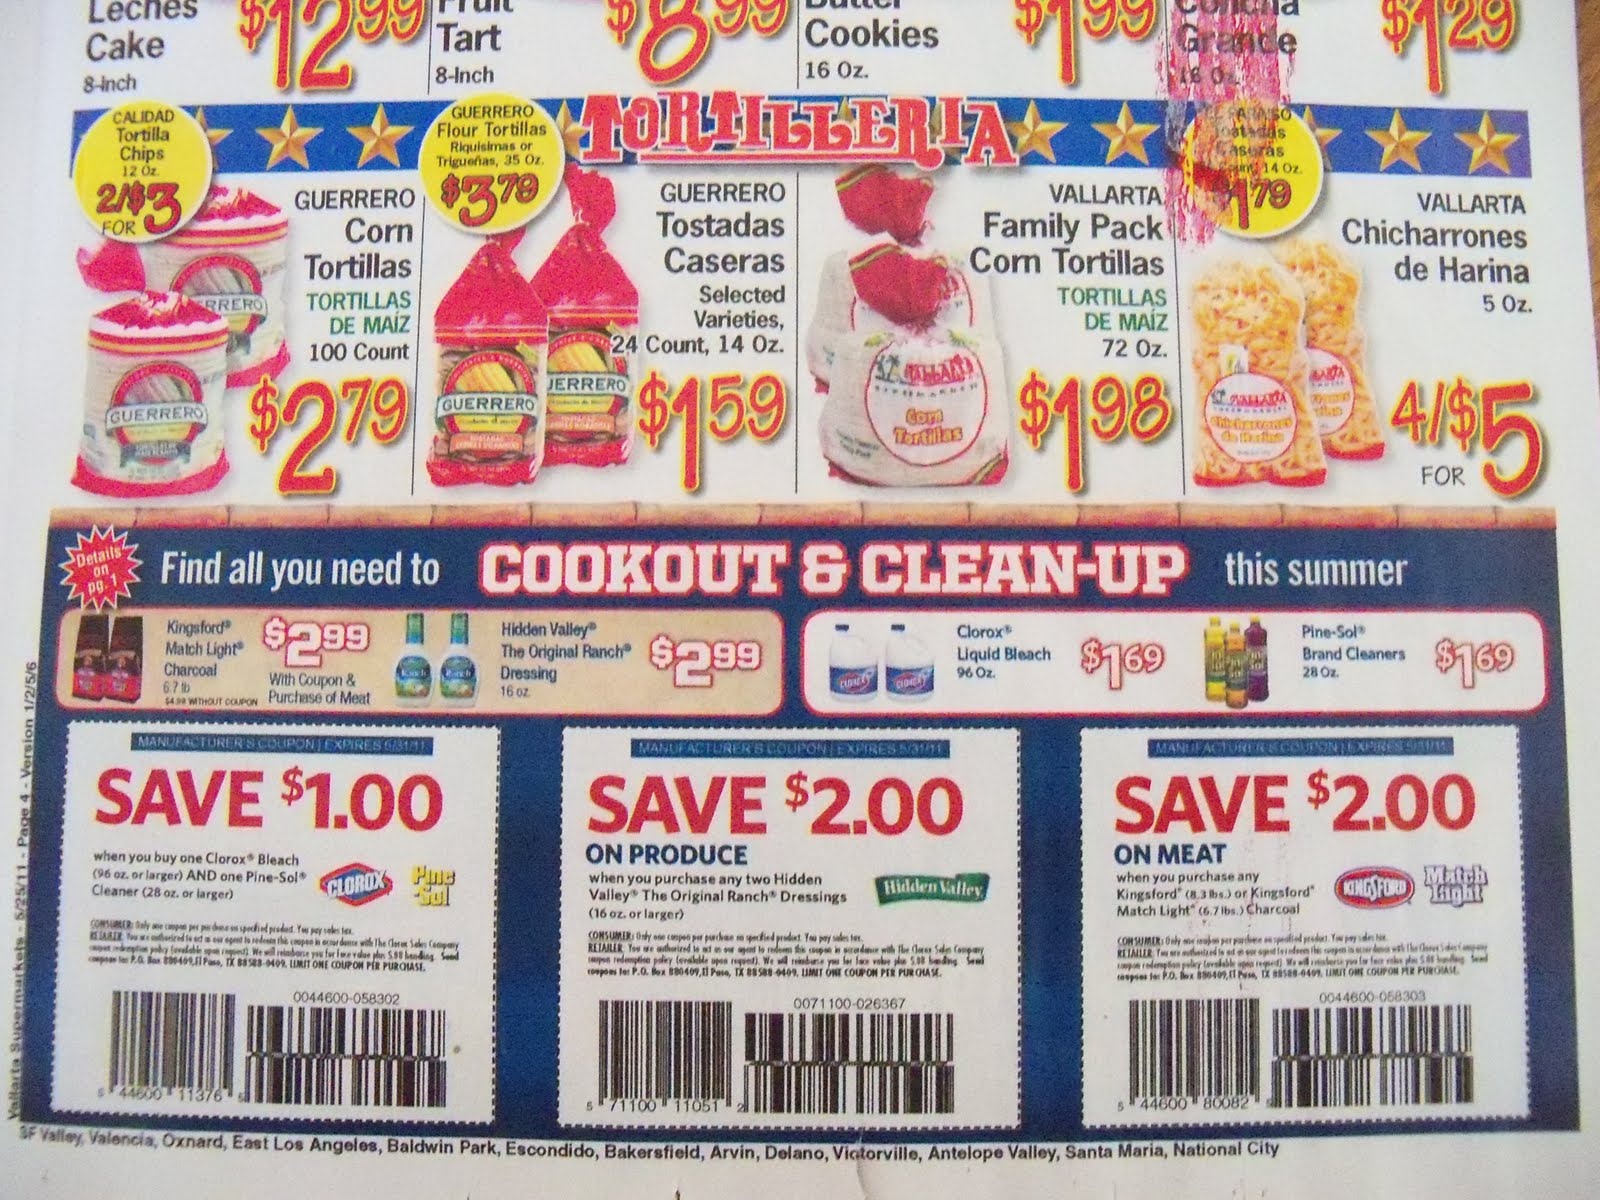 Printable Coupons Without Downloading Software / Kindle Deals Cyber - Free Printable Coupons Without Downloading Or Registering